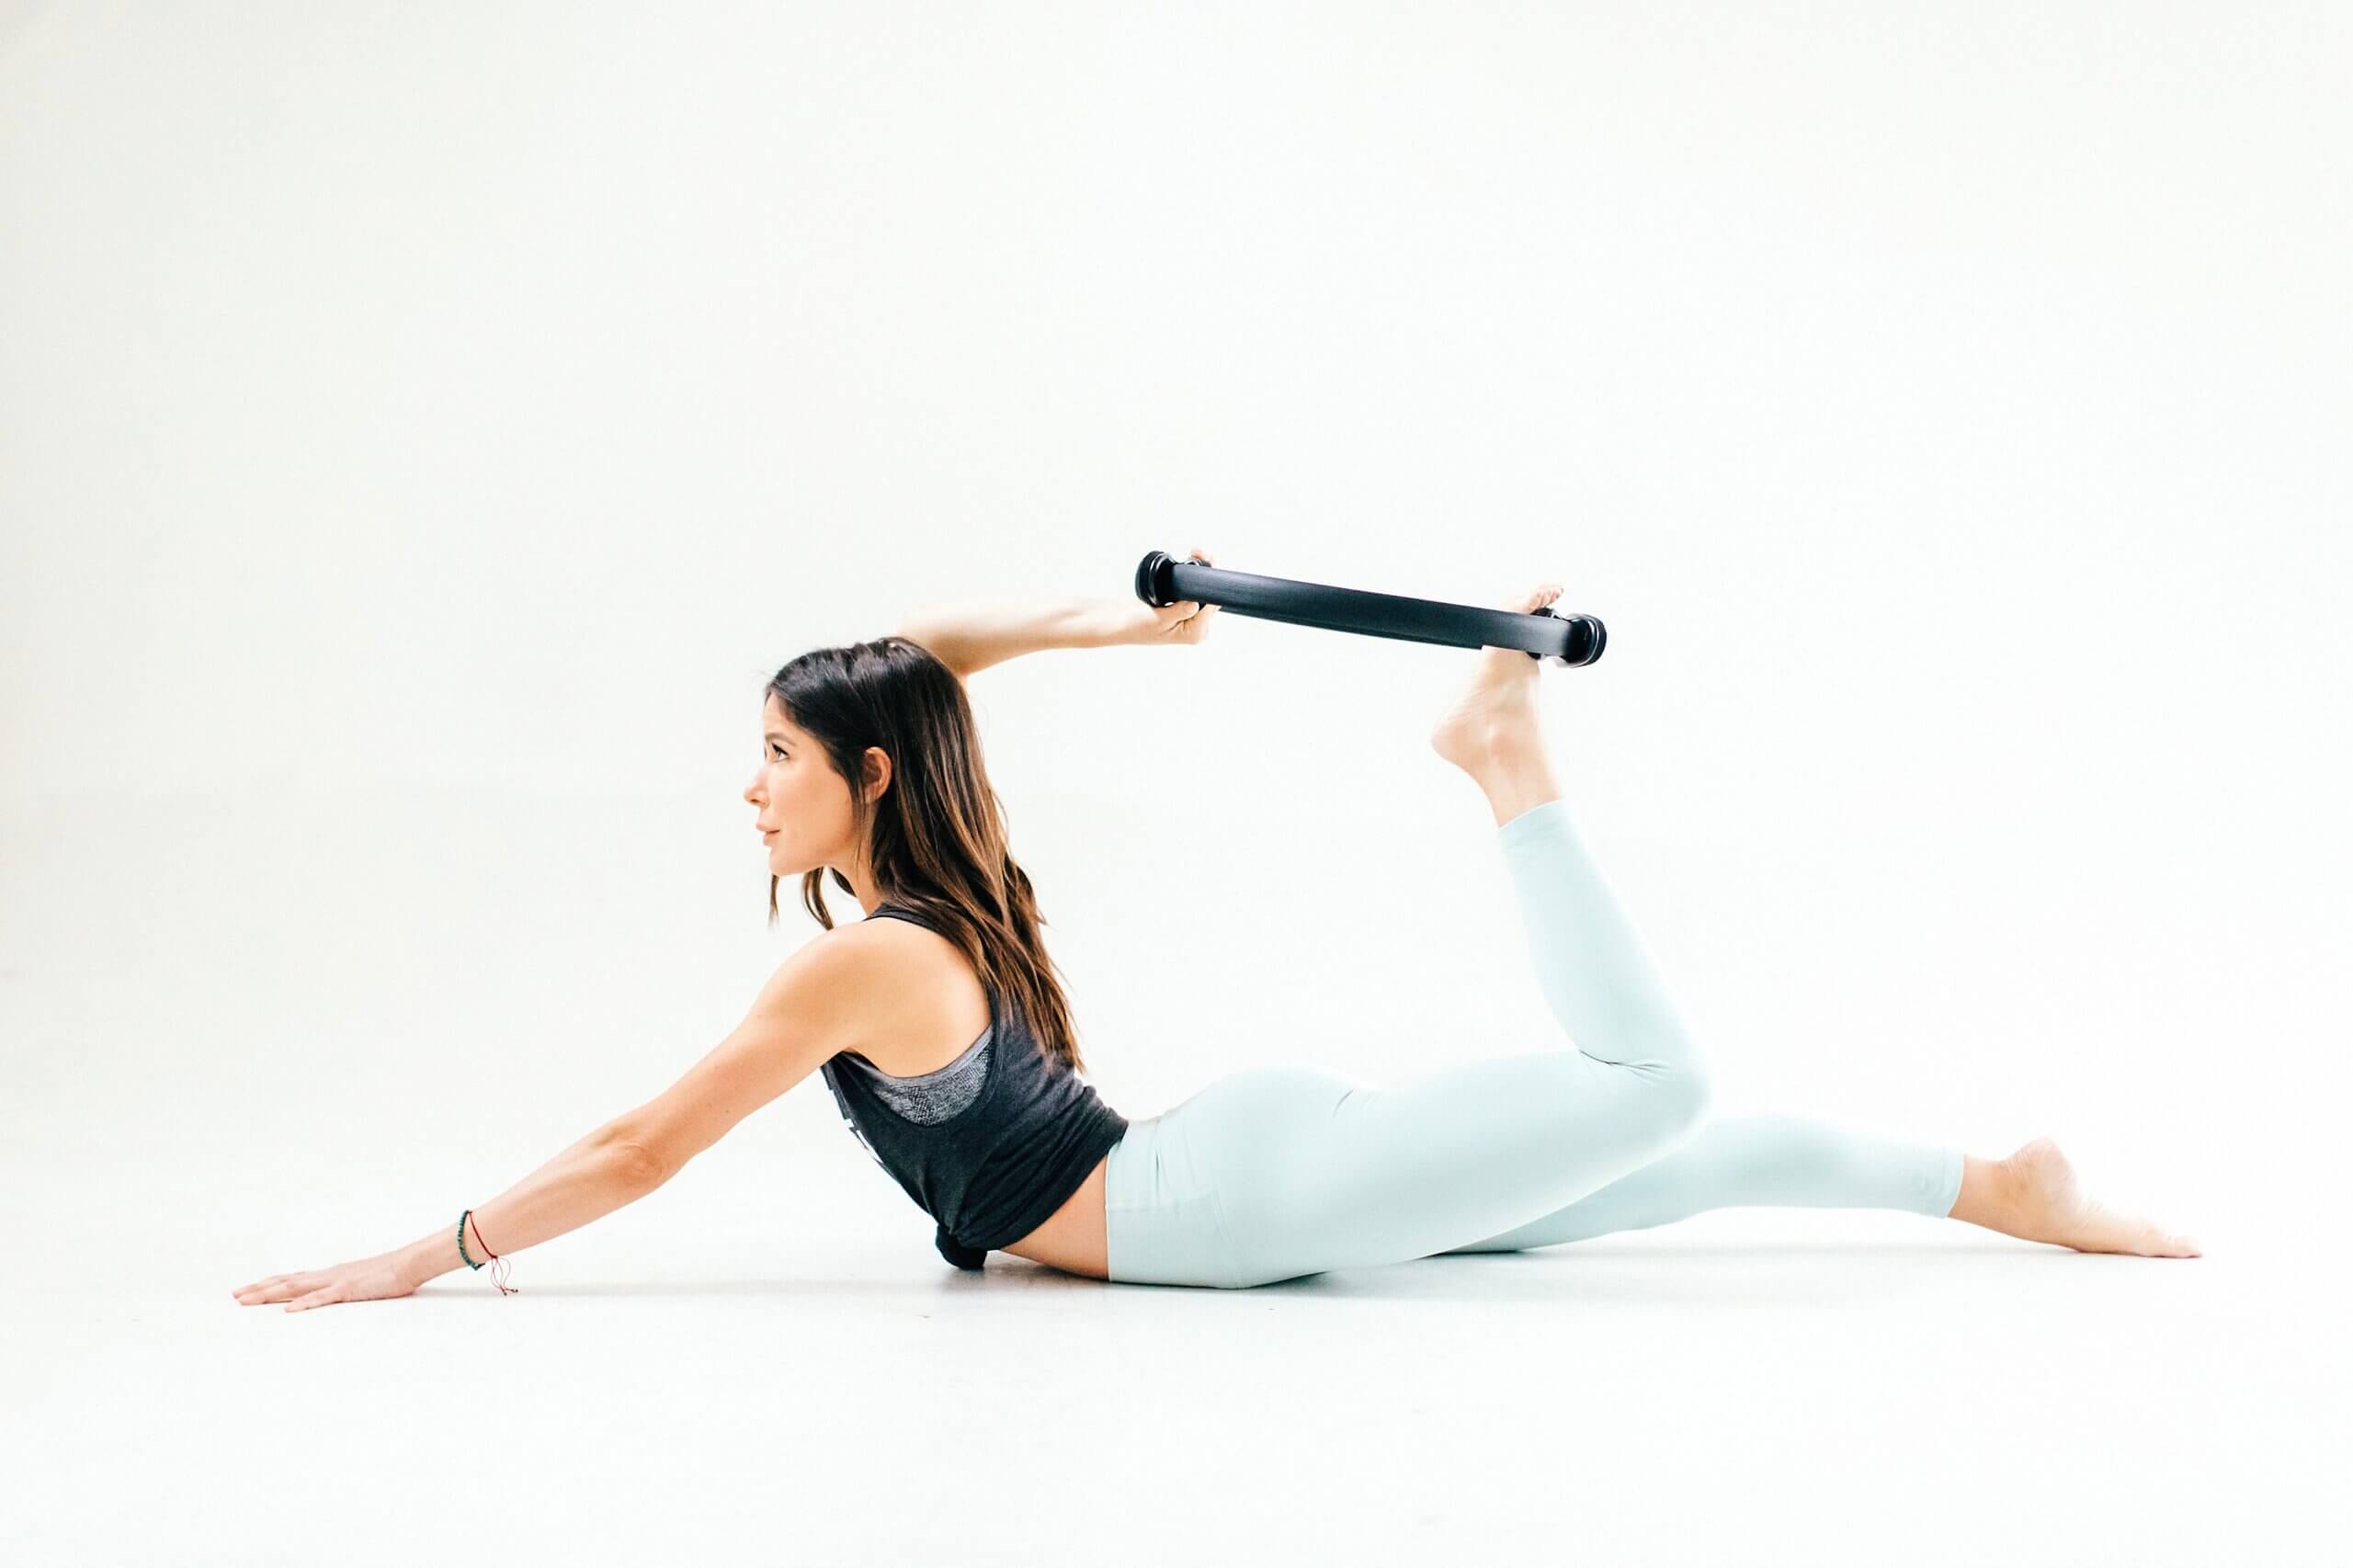 A recent study corroborated several others when it found that women who practiced Pilates for at least two hours a week showed improved self concept and improved overall life satisfaction.